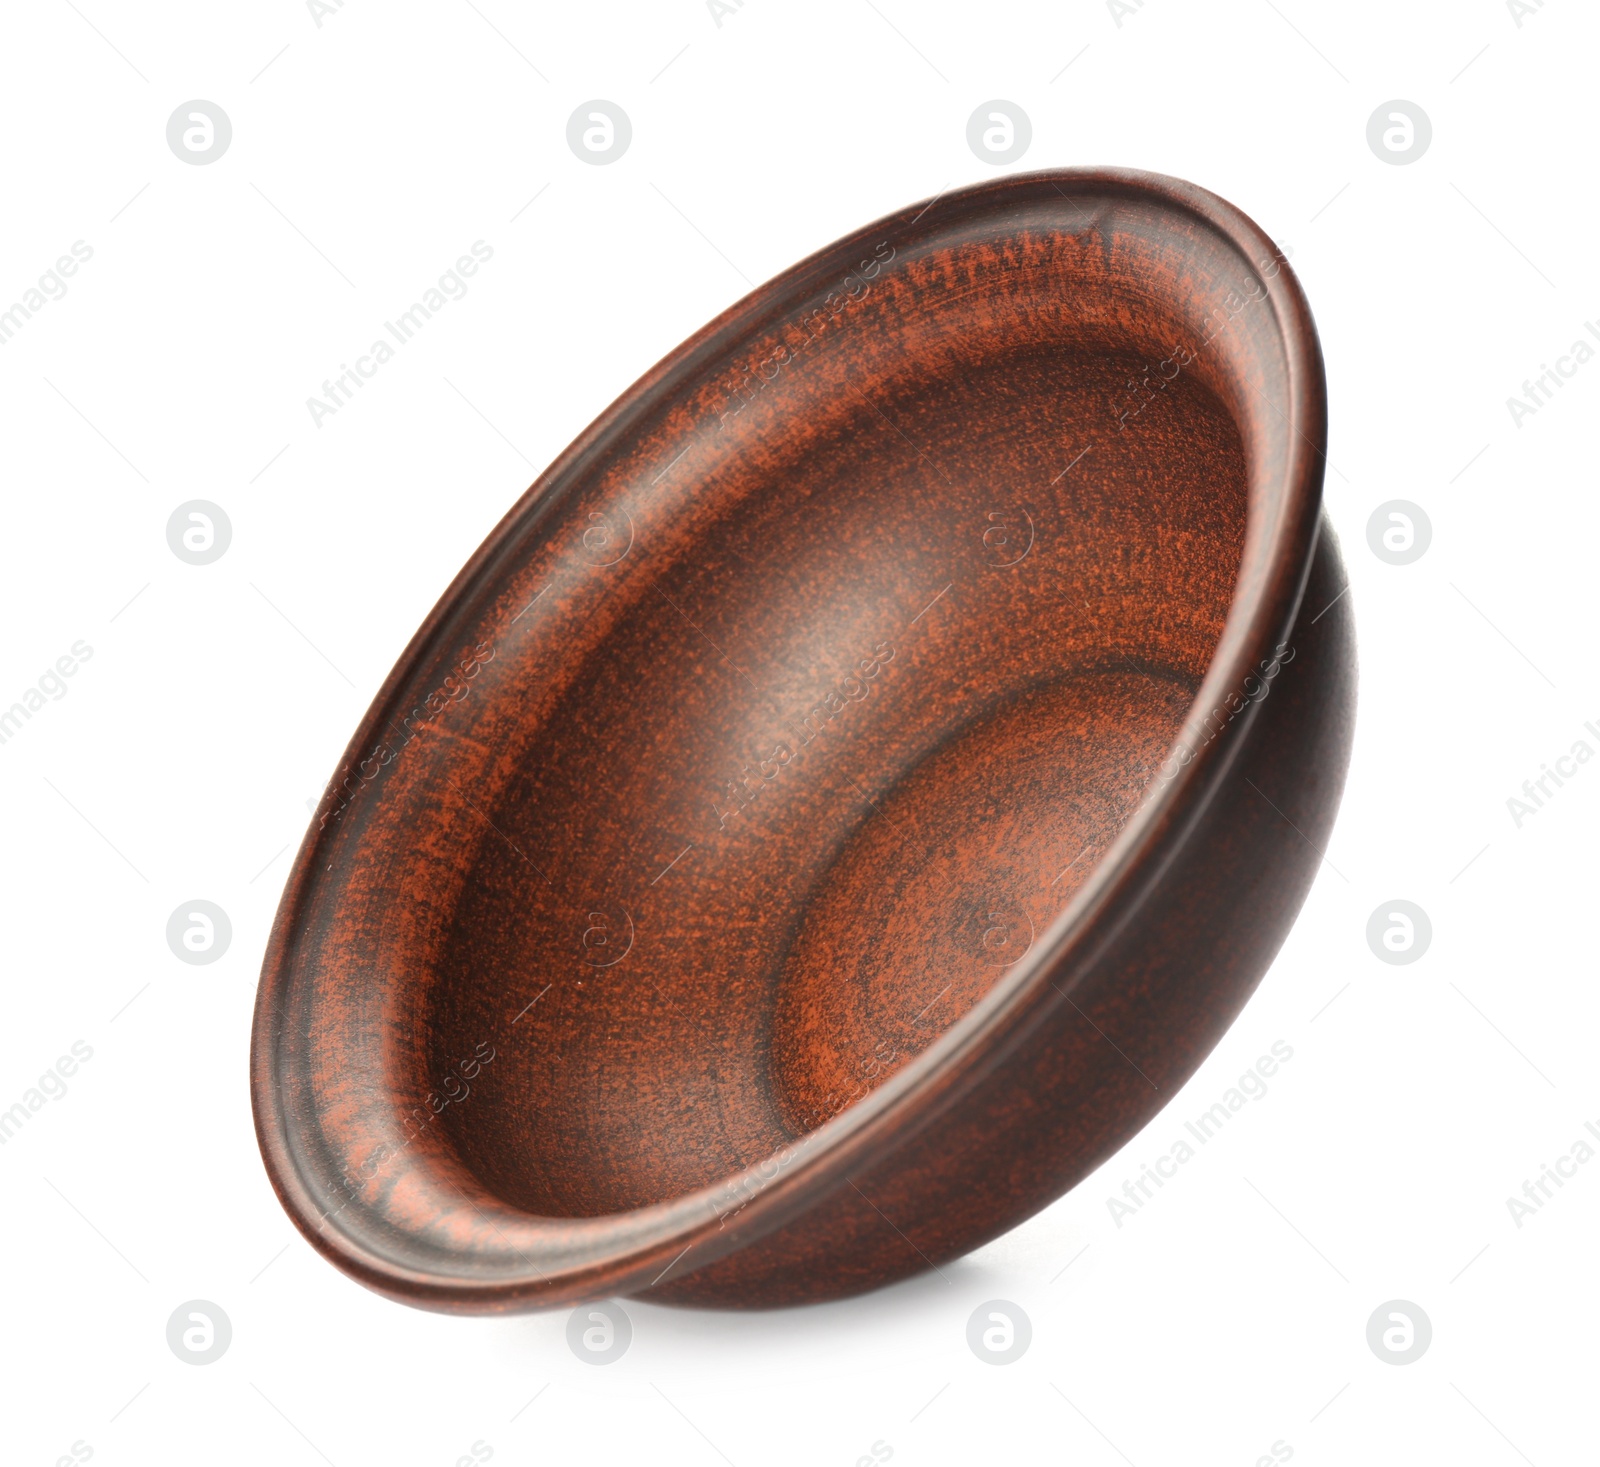 Photo of Stylish brown clay bowl isolated on white